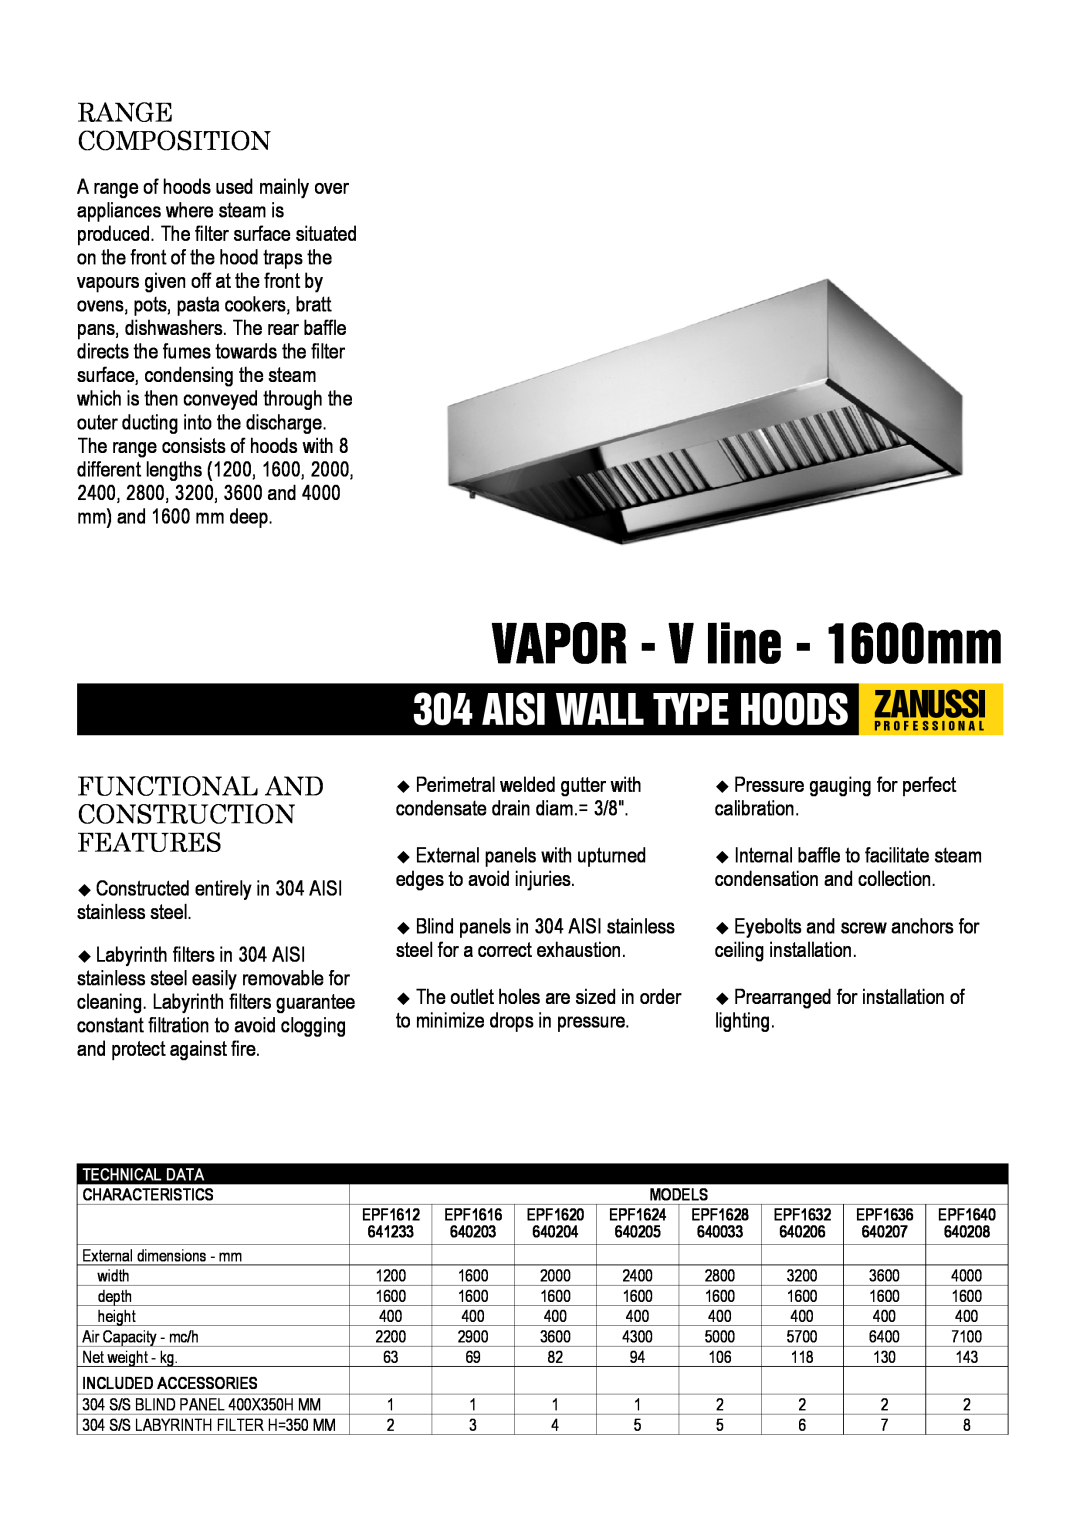 Zanussi EPF1632, 641233, 640205 dimensions VAPOR - V line - 1600mm, Range Composition, Functional And Construction Features 